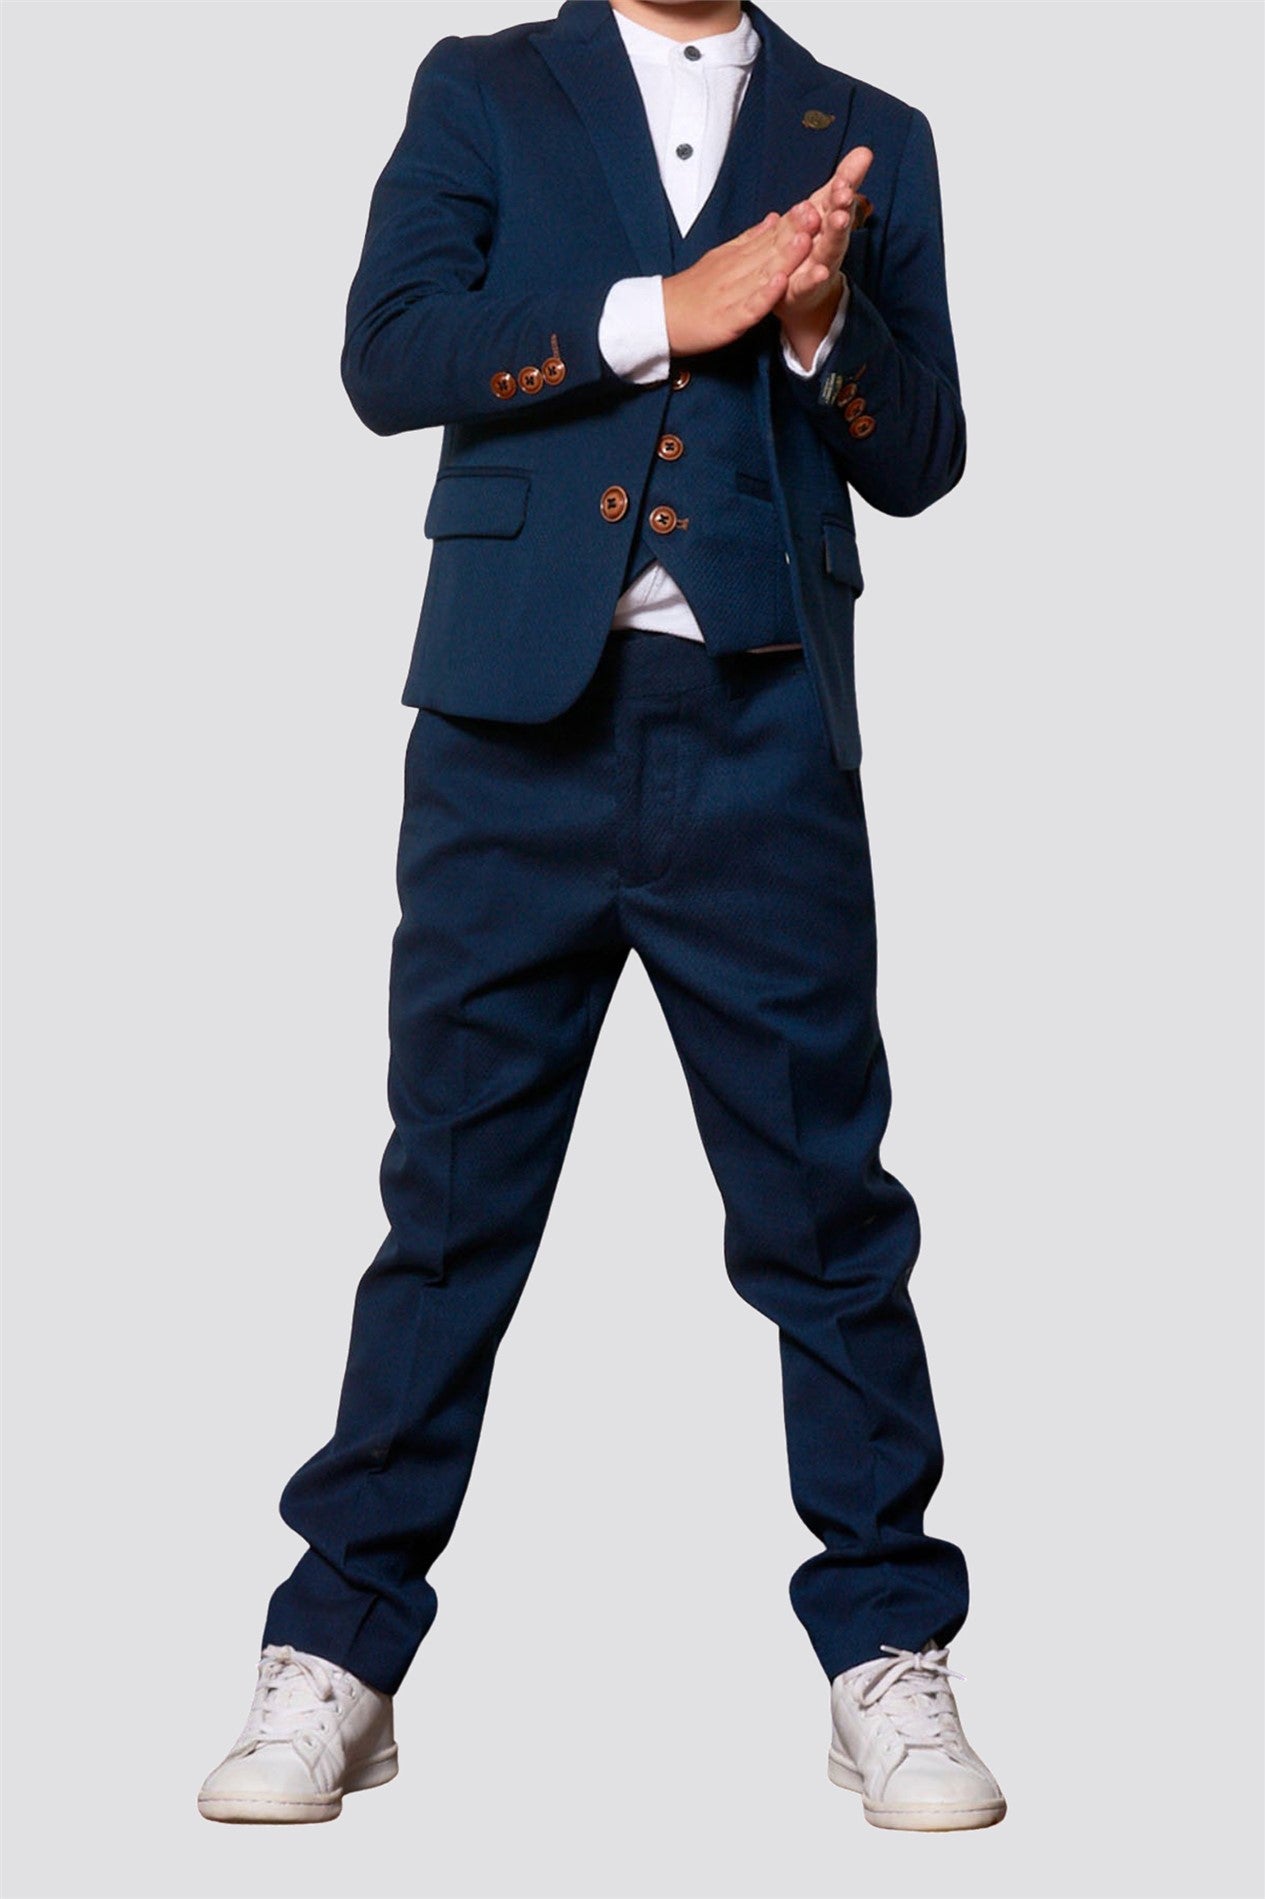 Kids Marc Darcy Royal Blue Three Piece Suit (Matching Adult Version Available)